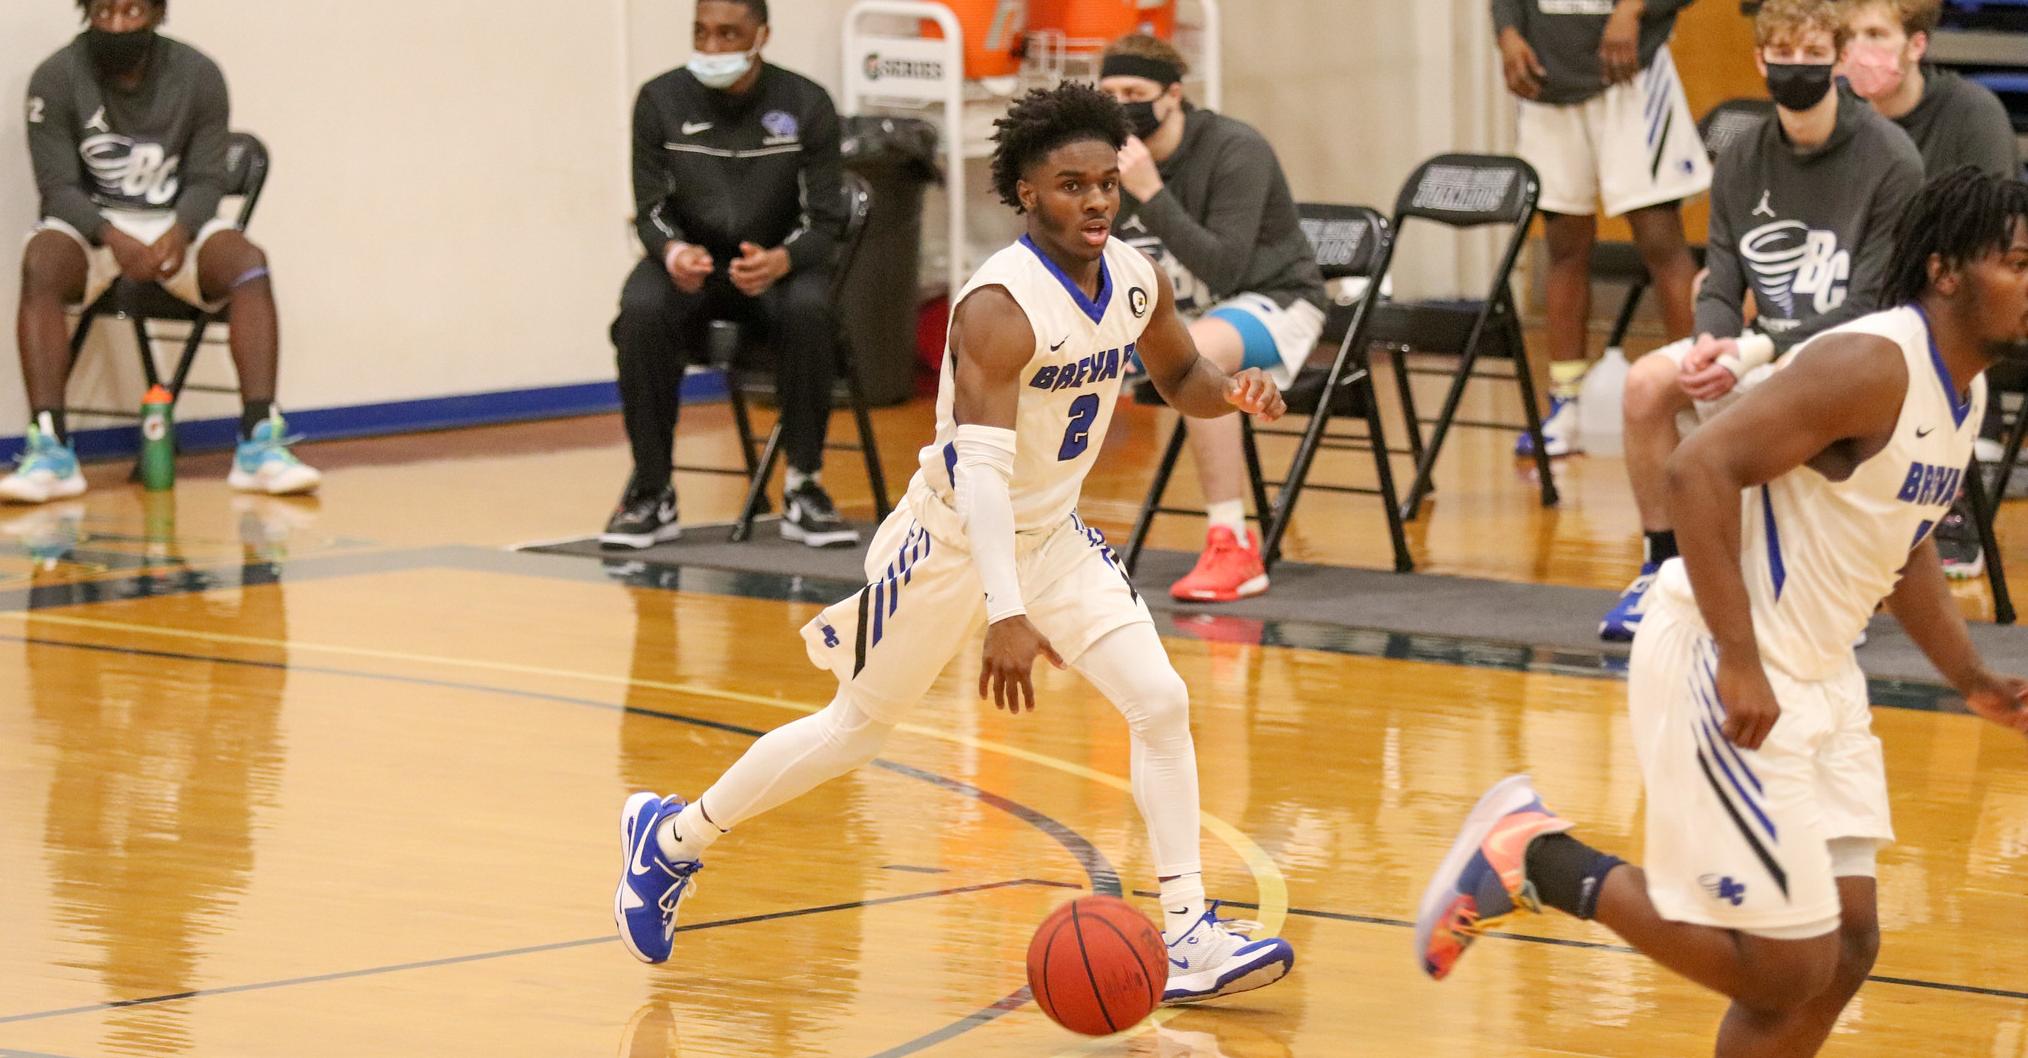 David Sealy recorded his first career double-double in Brevard's 79-66 victory over Berea (Photo courtesy of Victoria Brayman '22).